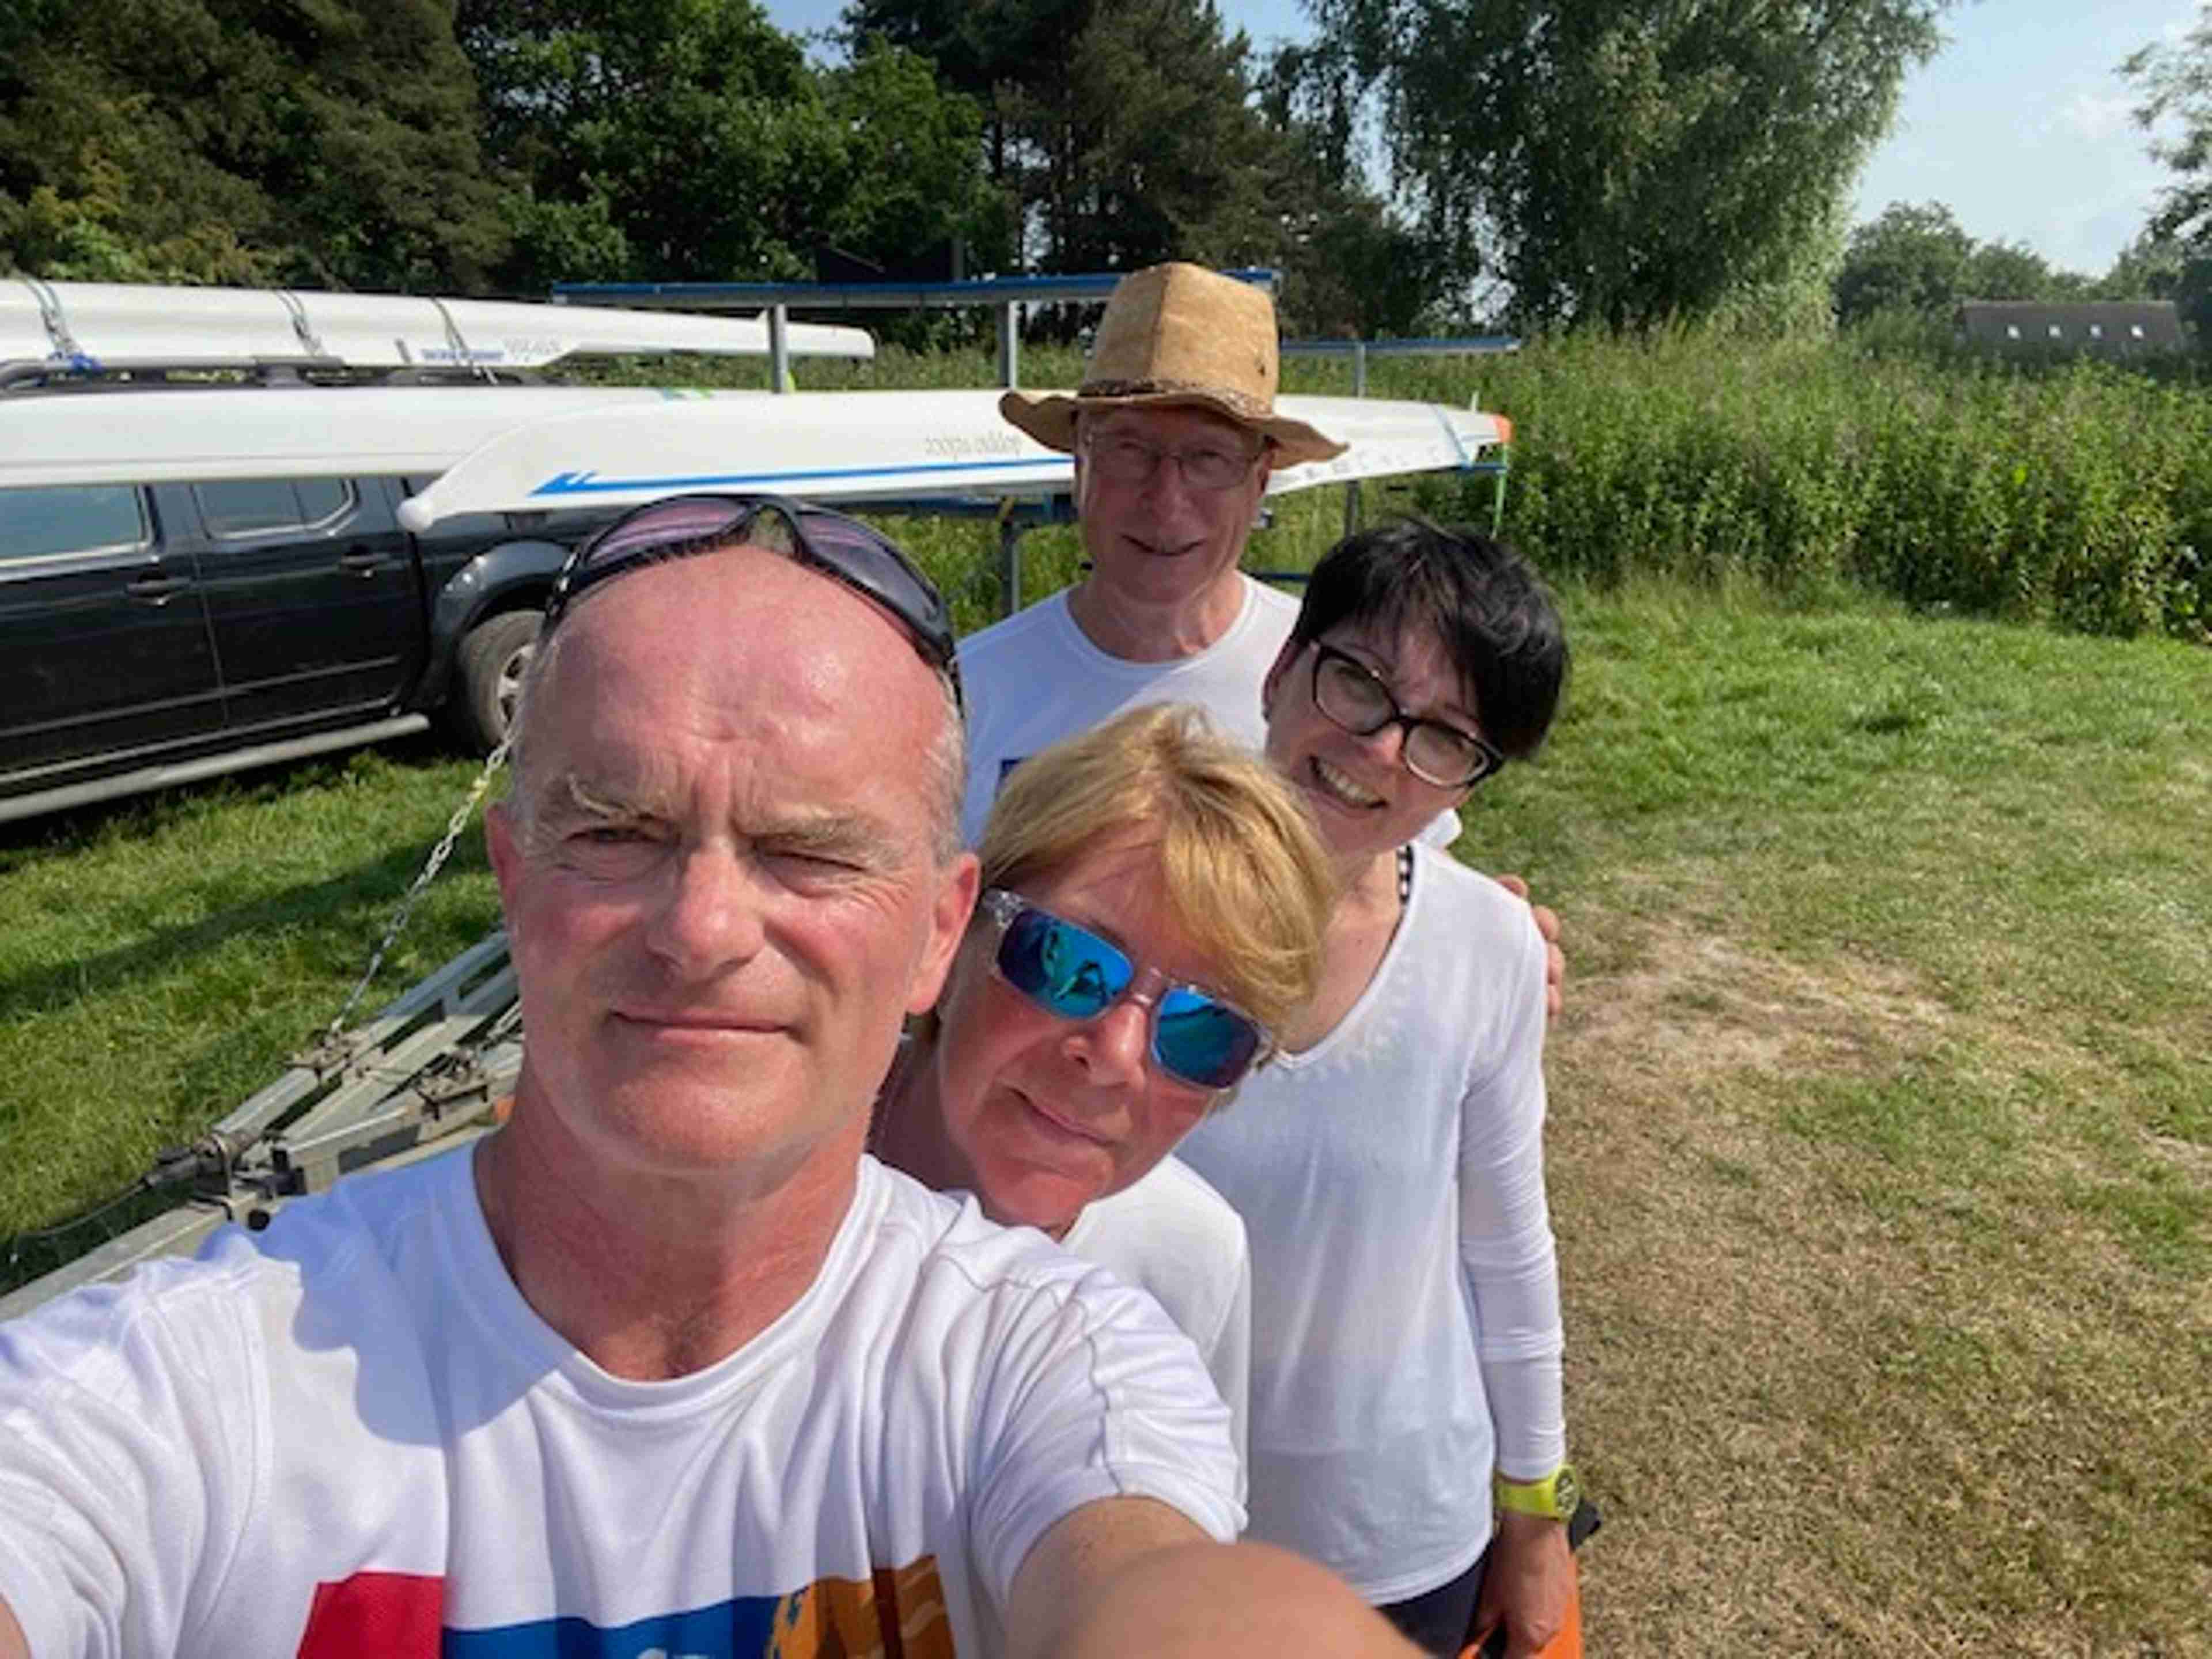 The crew take a selfie. Sean is in the foreground and taking the photo. Jeremy is in the distant background wearing a straw hat and reading glasses. Teresa and Tracy and queued up between them. Behind the four is a boat trailer, a bank of nettles and a line of trees.